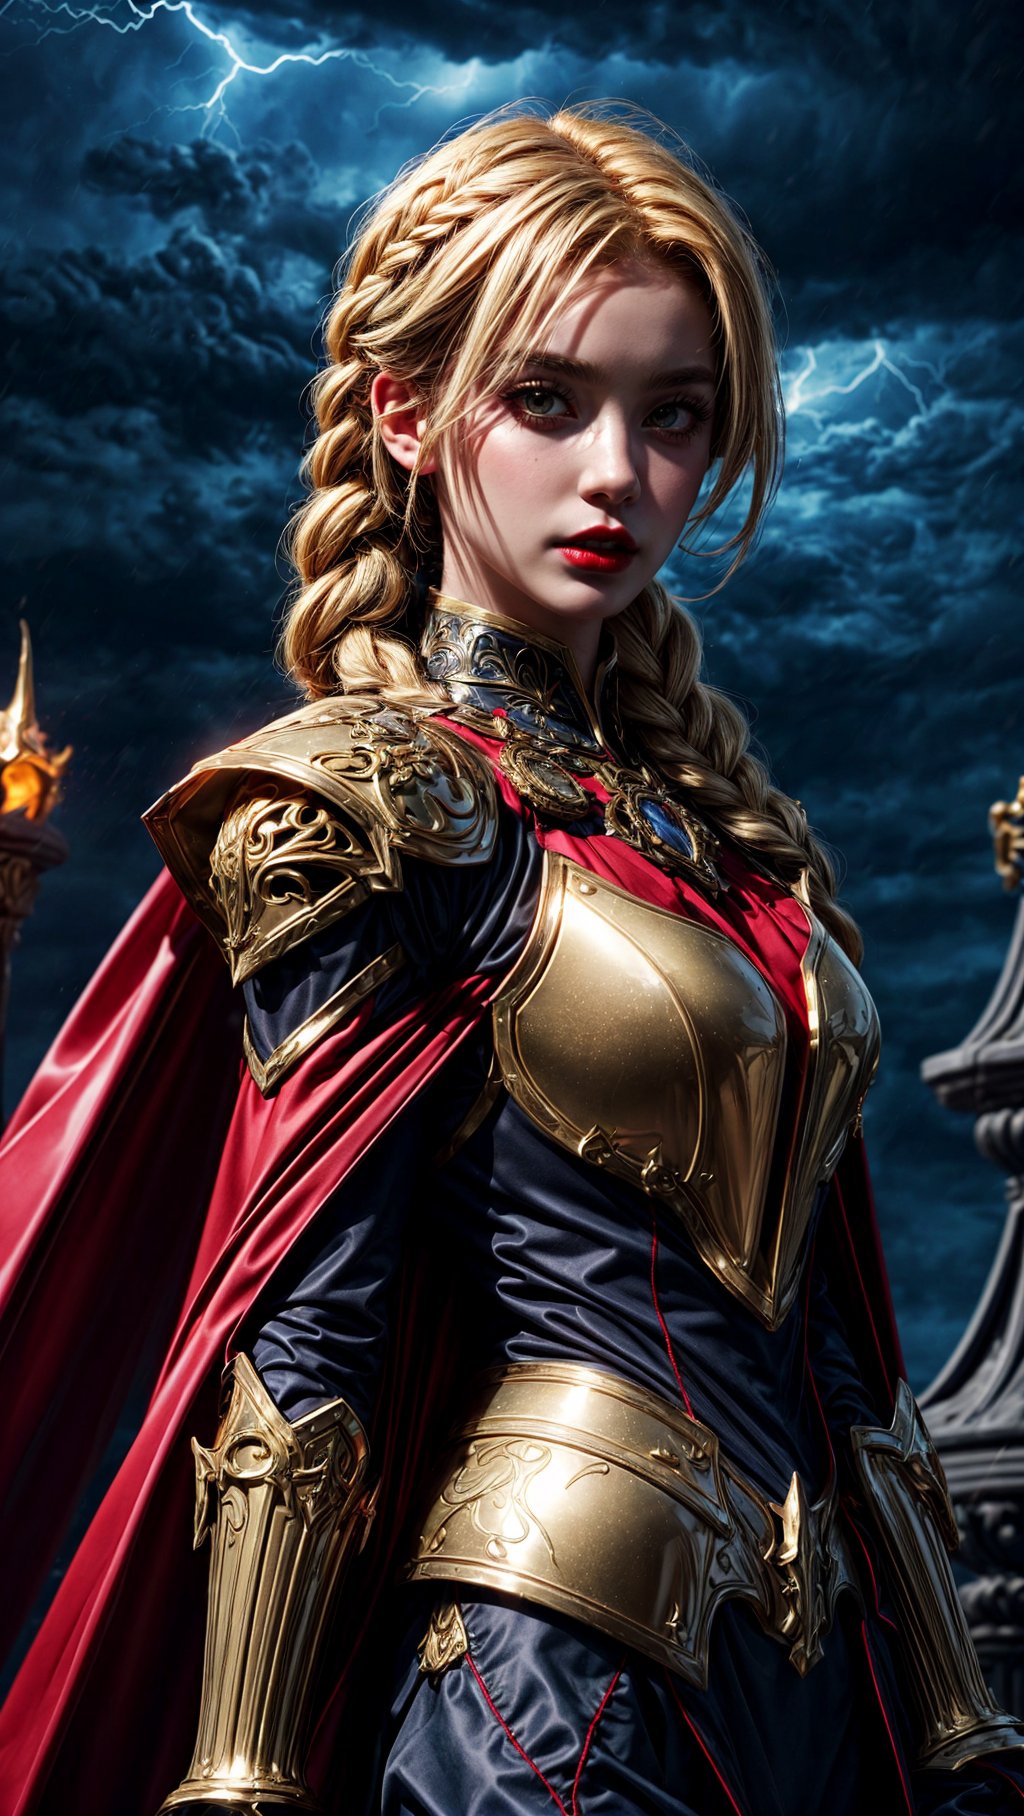 solo, portrait of paladin lady in ornate armor, red lips, pauldrons, frills, cape, blonde hair, braid, glowing halo, night, particles, royal castle background, bokeh, yellow lightning, storm, dark clouds